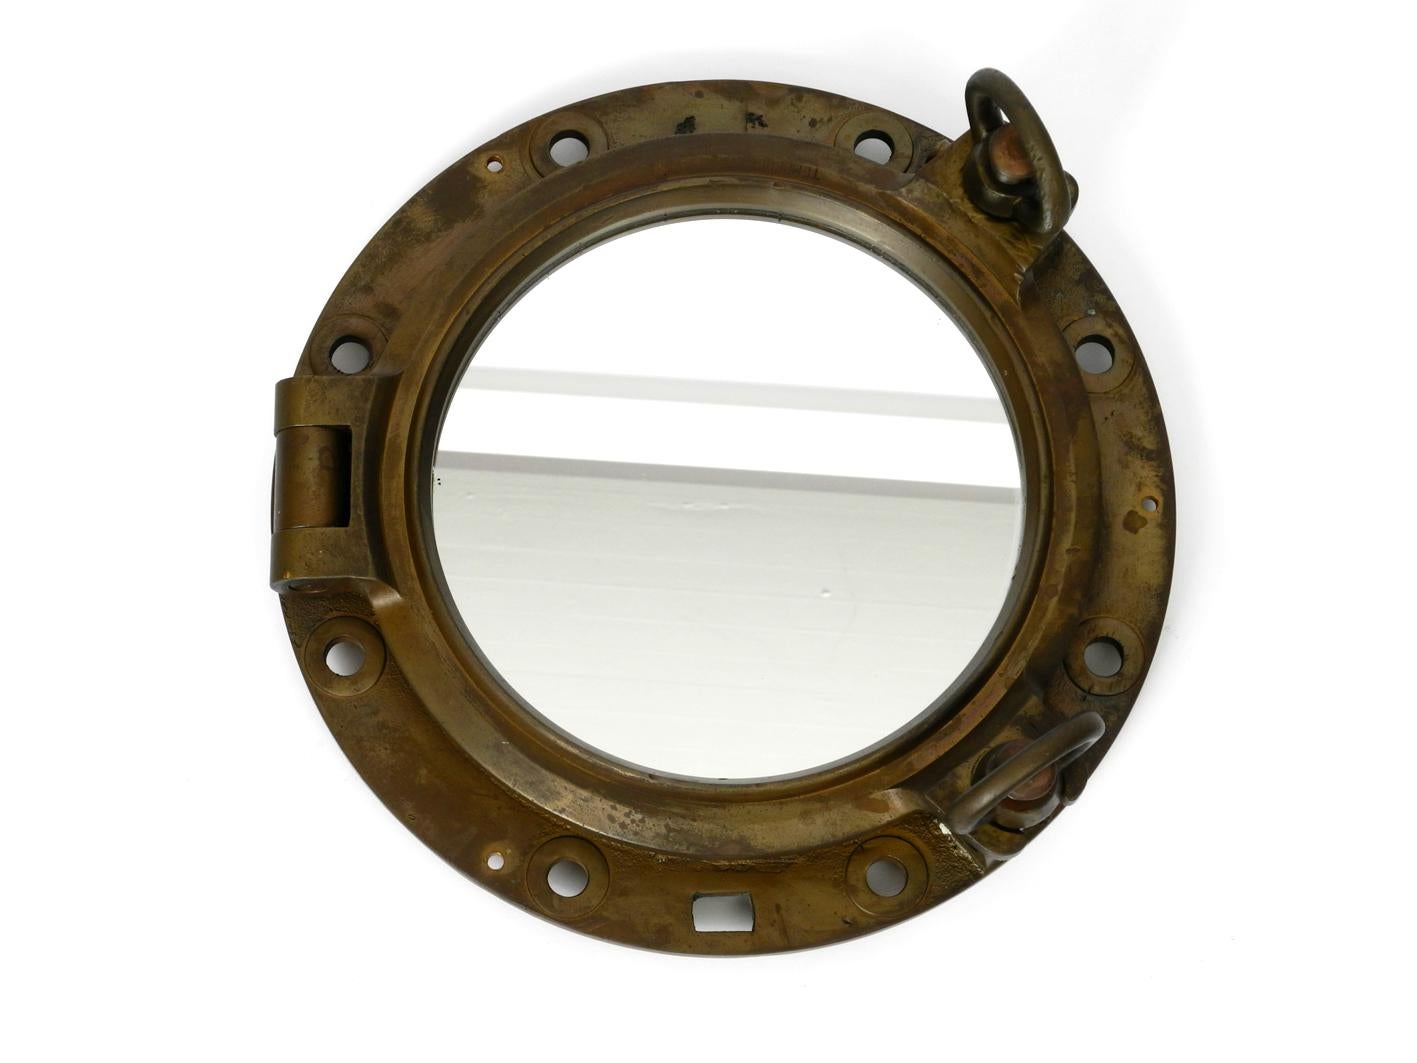 Beautiful rare old brass ship's porthole as a wall mirror.
Very heavy and solid construction. With original screws for opening.
New mirror was sometime before installed. On the back you can see some of it. All parts complete and do work. Certainly